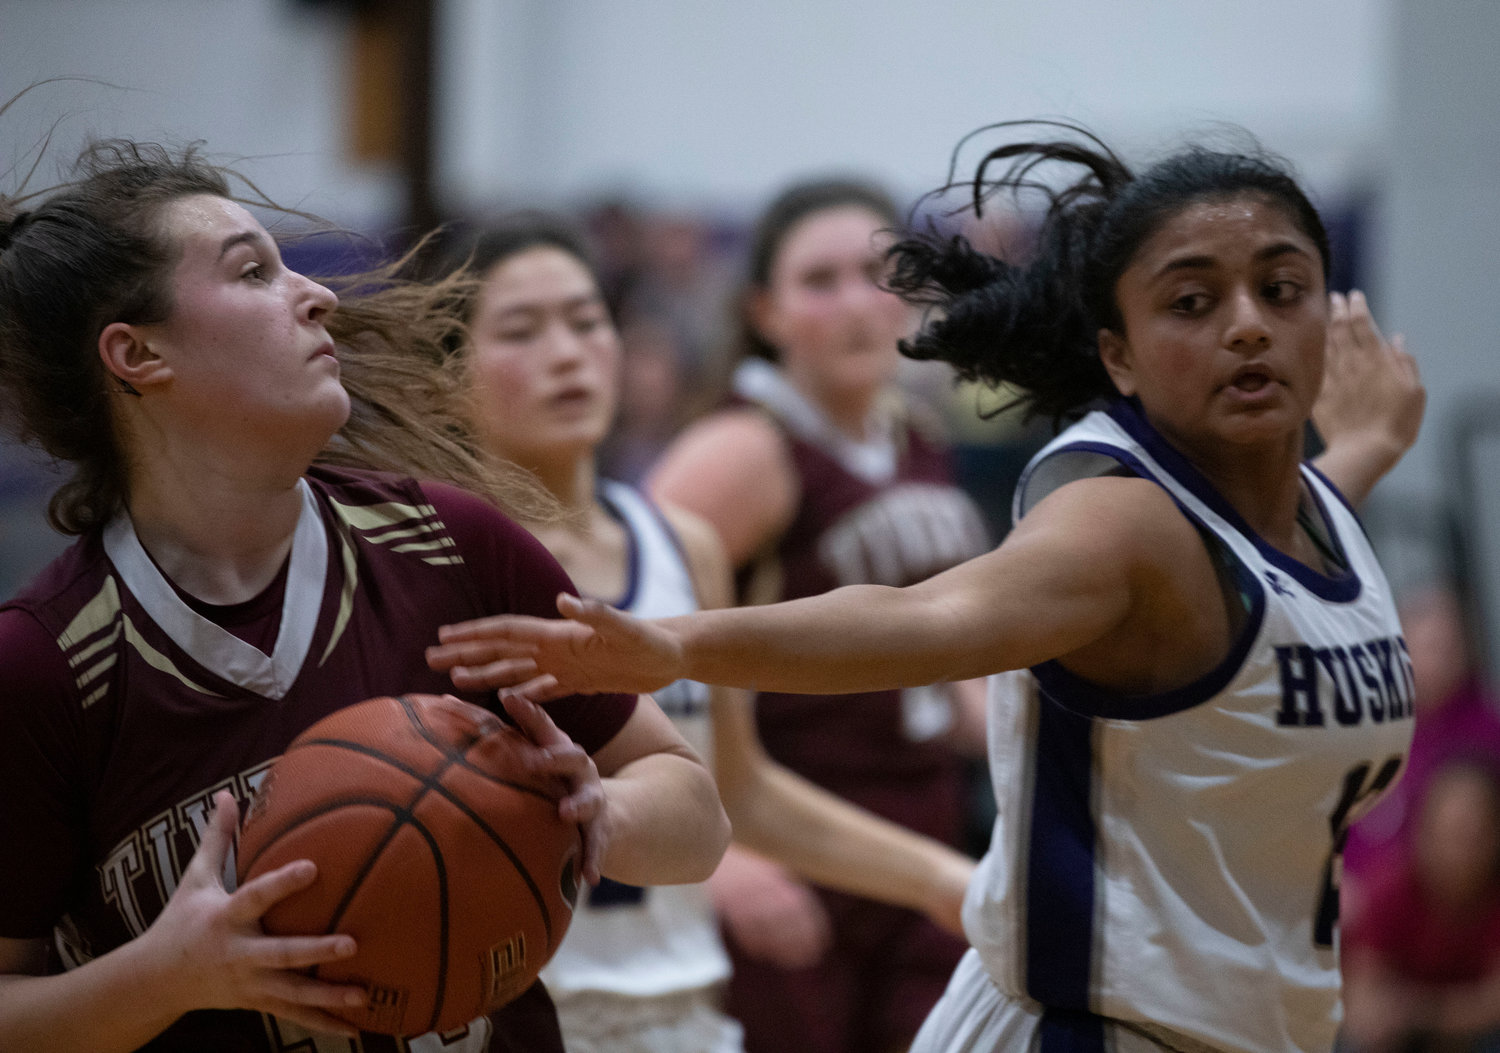 Abbie Monkevicz drives in for a layup with Shivani Mehta defending the Huskies hoop.